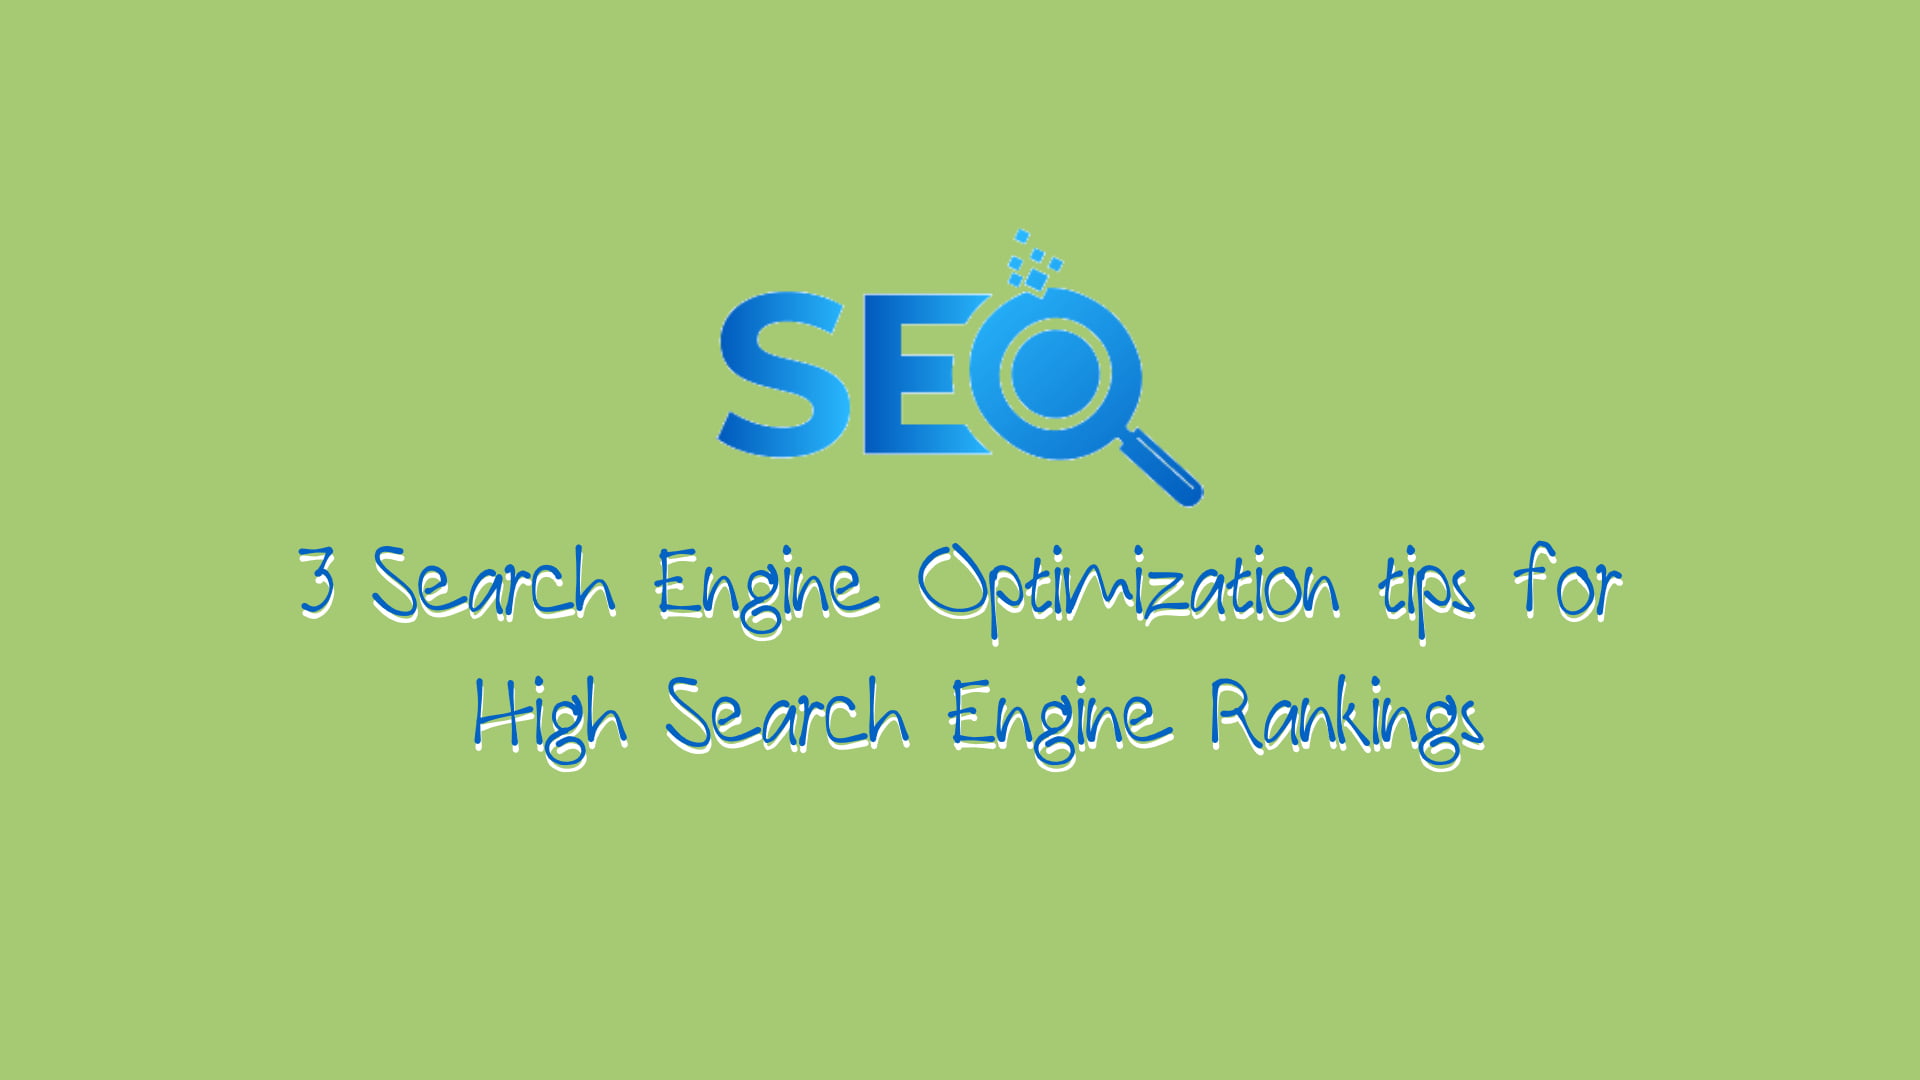 3 Search Engine Optimization tips for High Search Engine Rankings